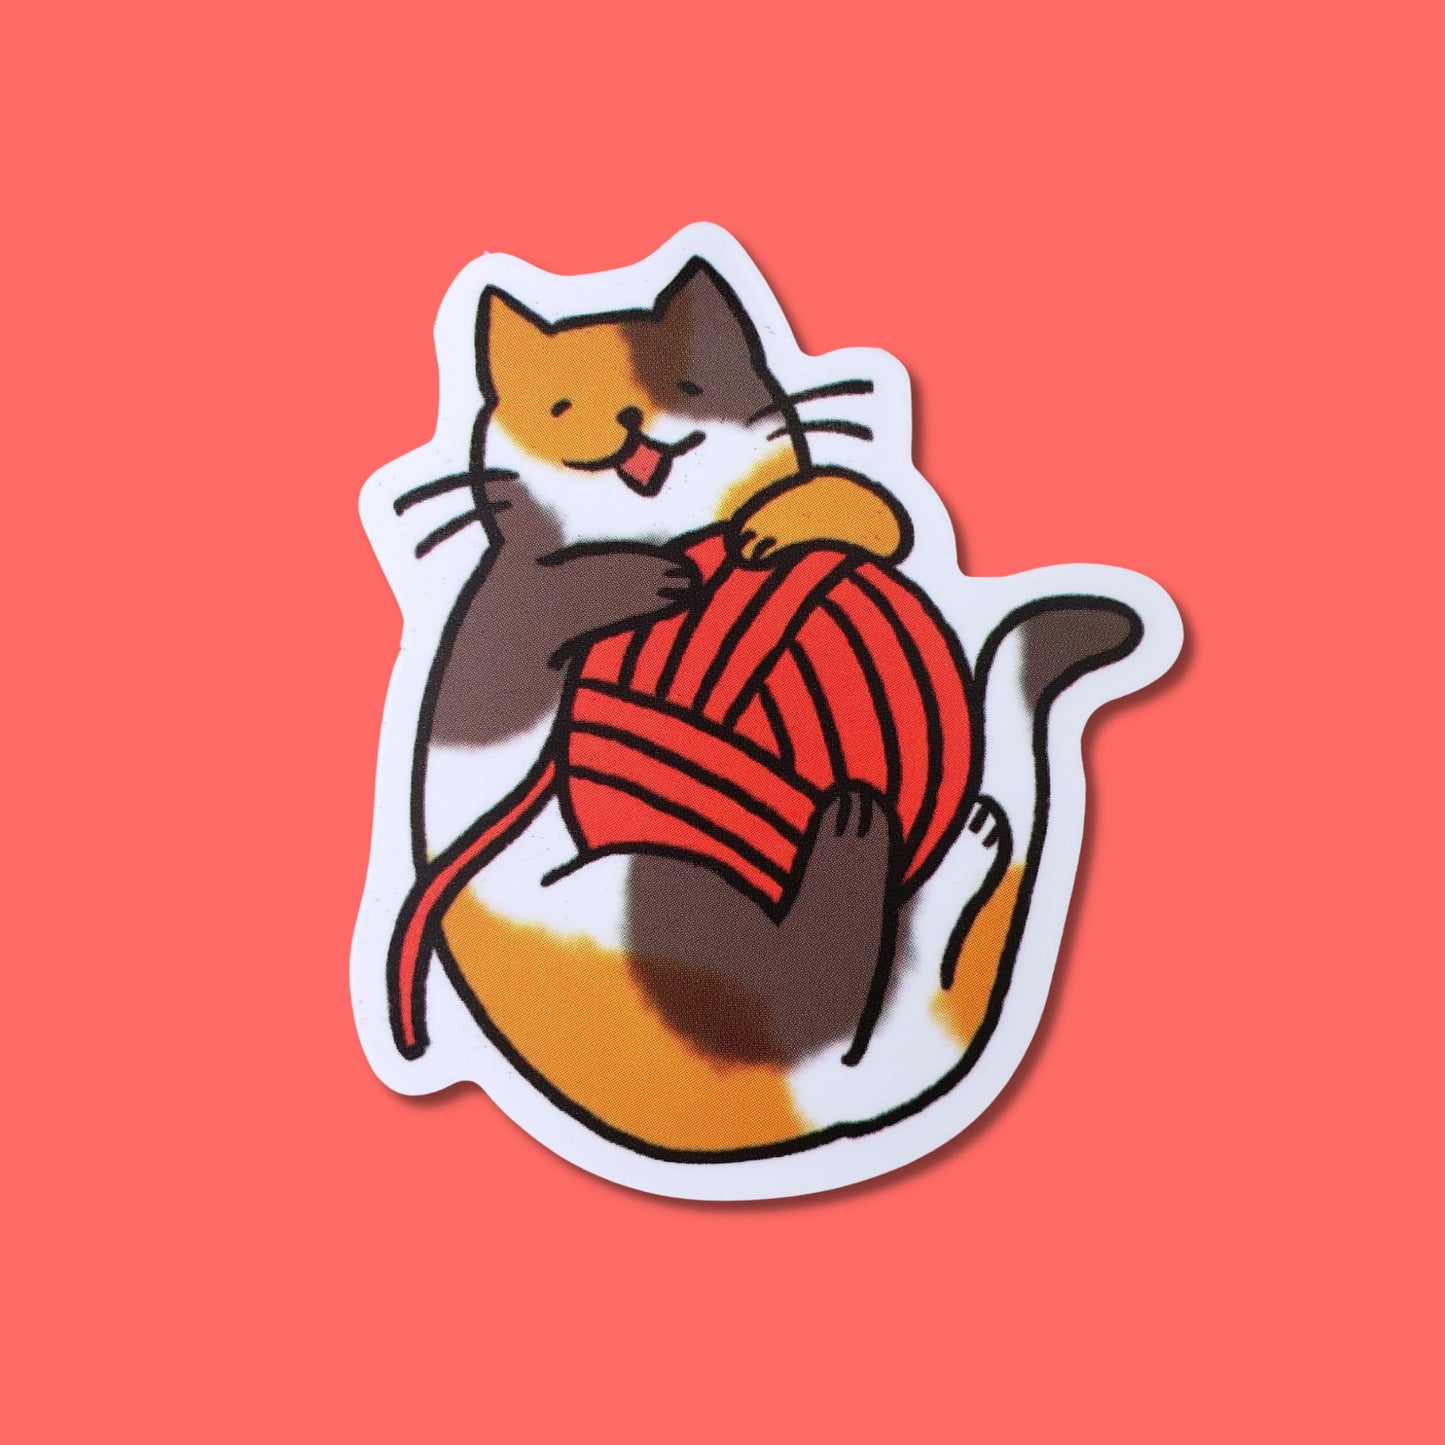 Calico Kitty with Ball of Yarn Waterproof Sticker from Confetti Kitty, Only 1.00